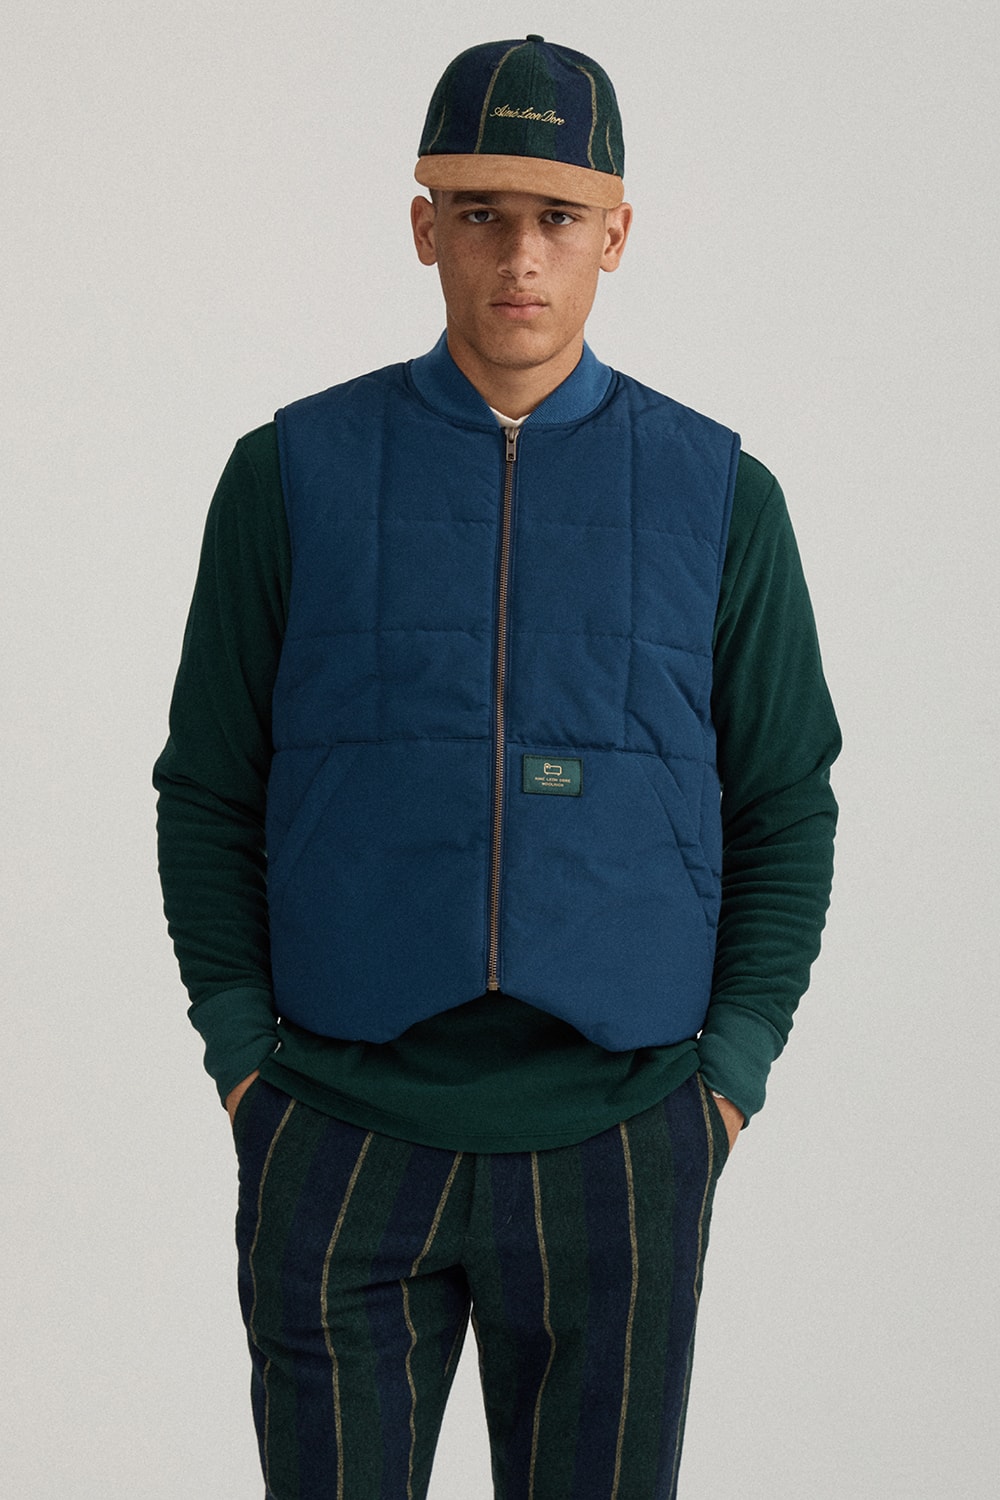 aime leon dore fall winter 2019 collection lookbook teddy santis knitwear outerwear waders woolrich collaboration buy cop purchase new york